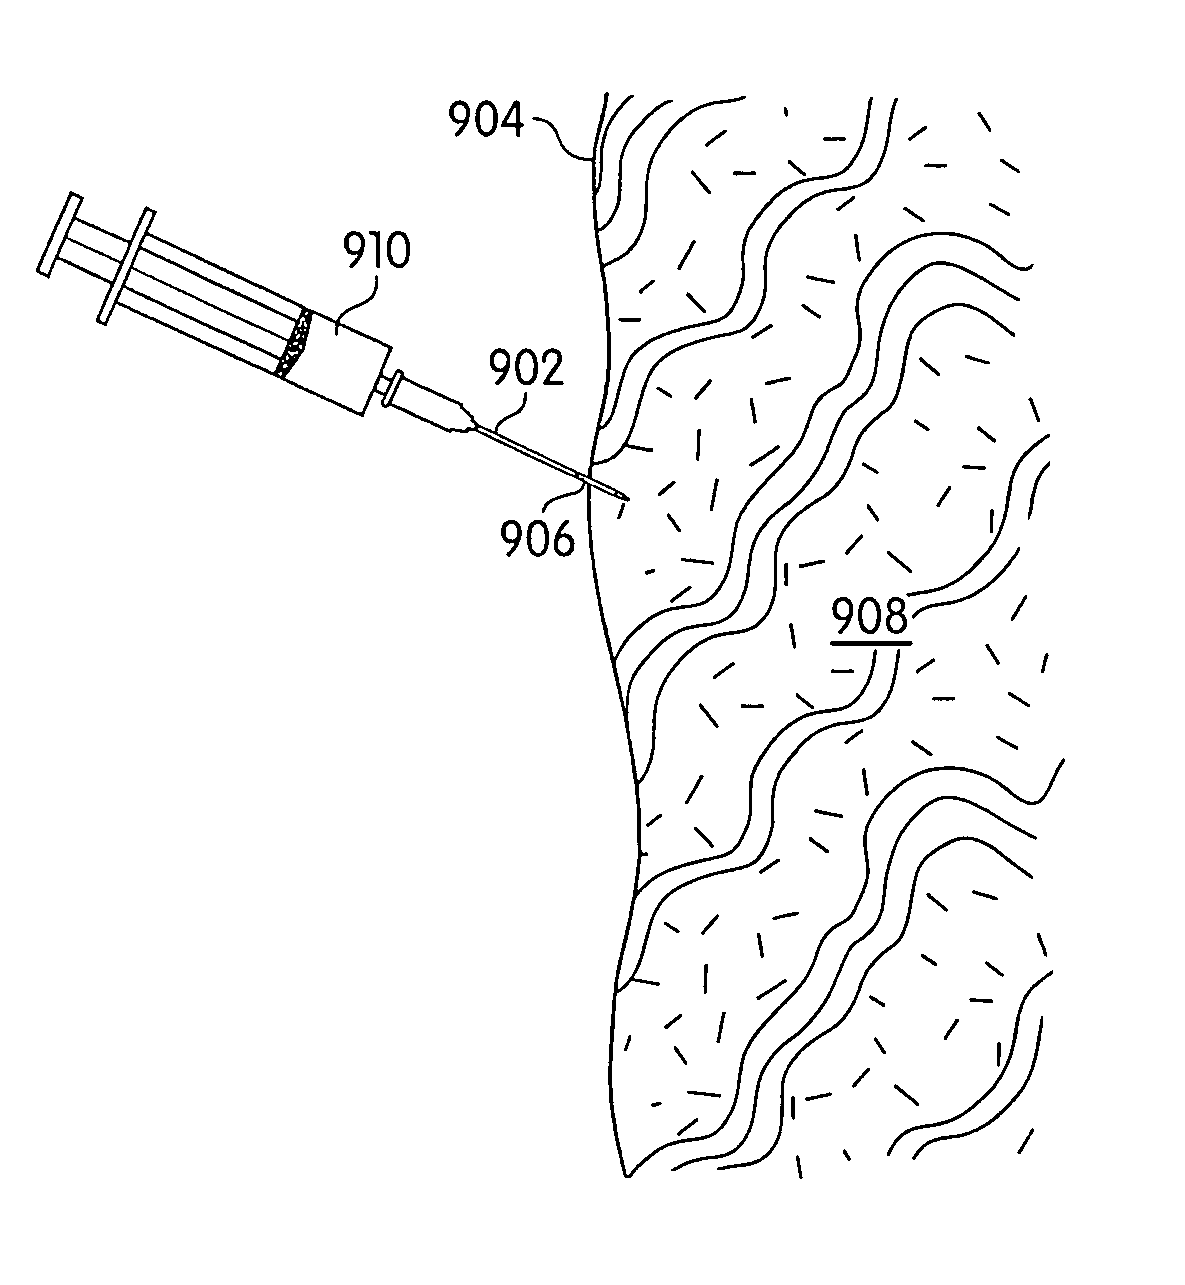 Injectable sustained release delivery devices